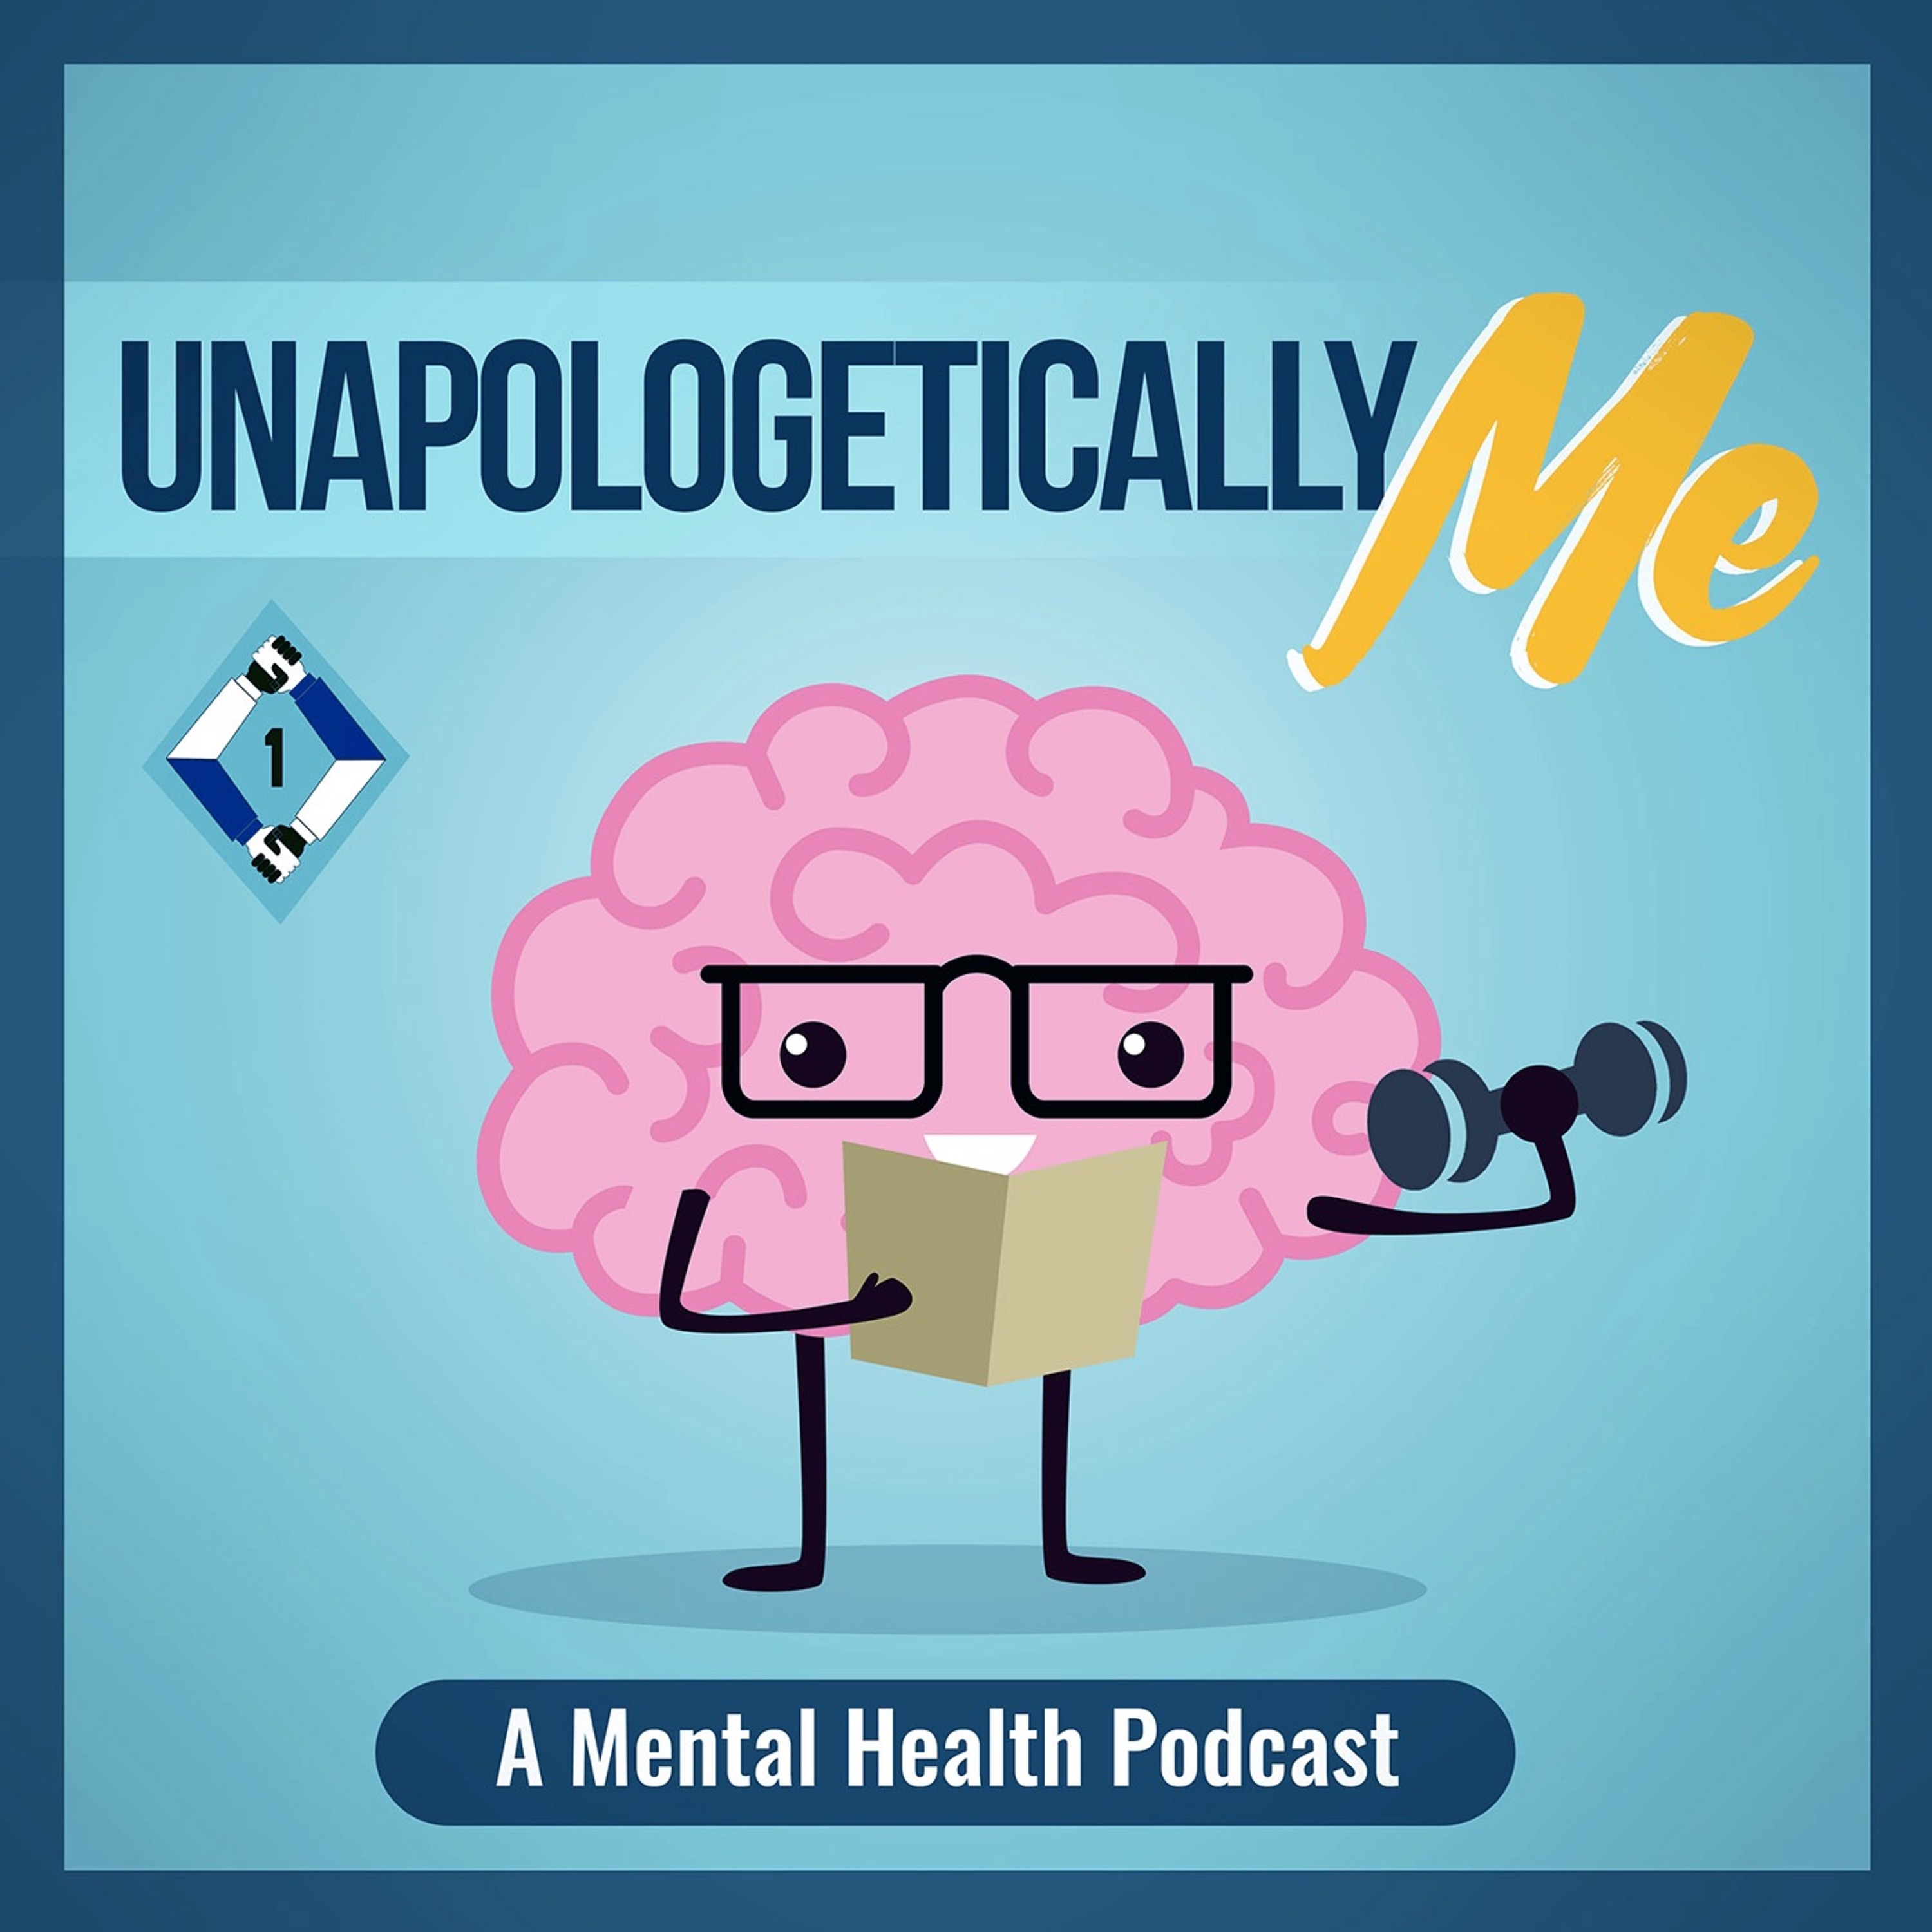 Unapologetically Me: A Mental Health Podcast - PODCAST RECAP 1